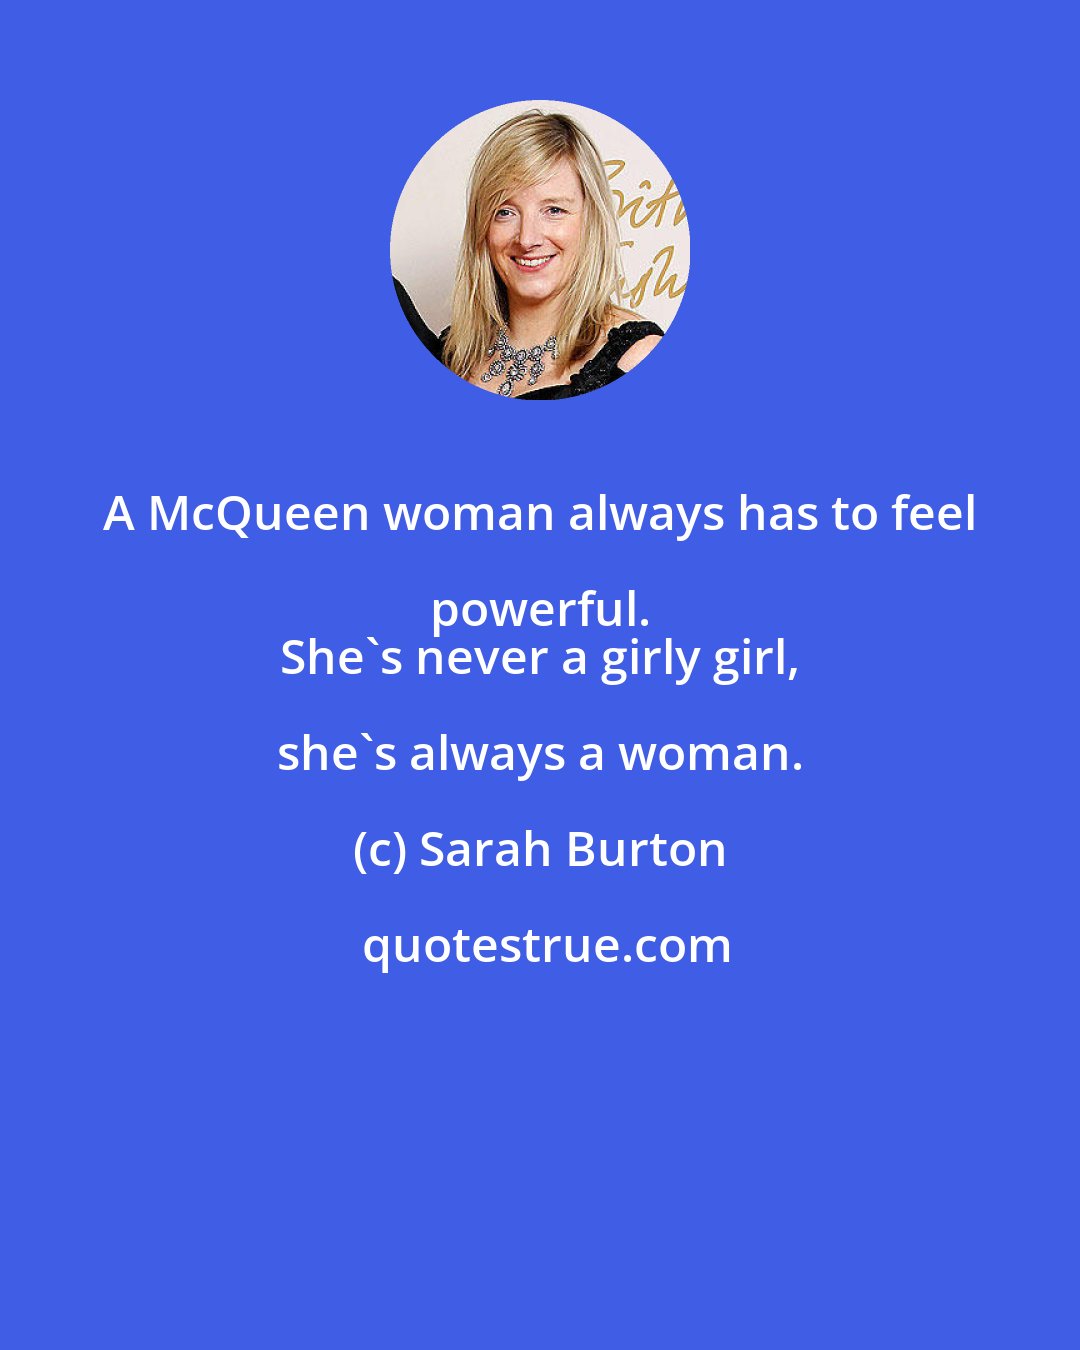 Sarah Burton: A McQueen woman always has to feel powerful. 
 She's never a girly girl, she's always a woman.